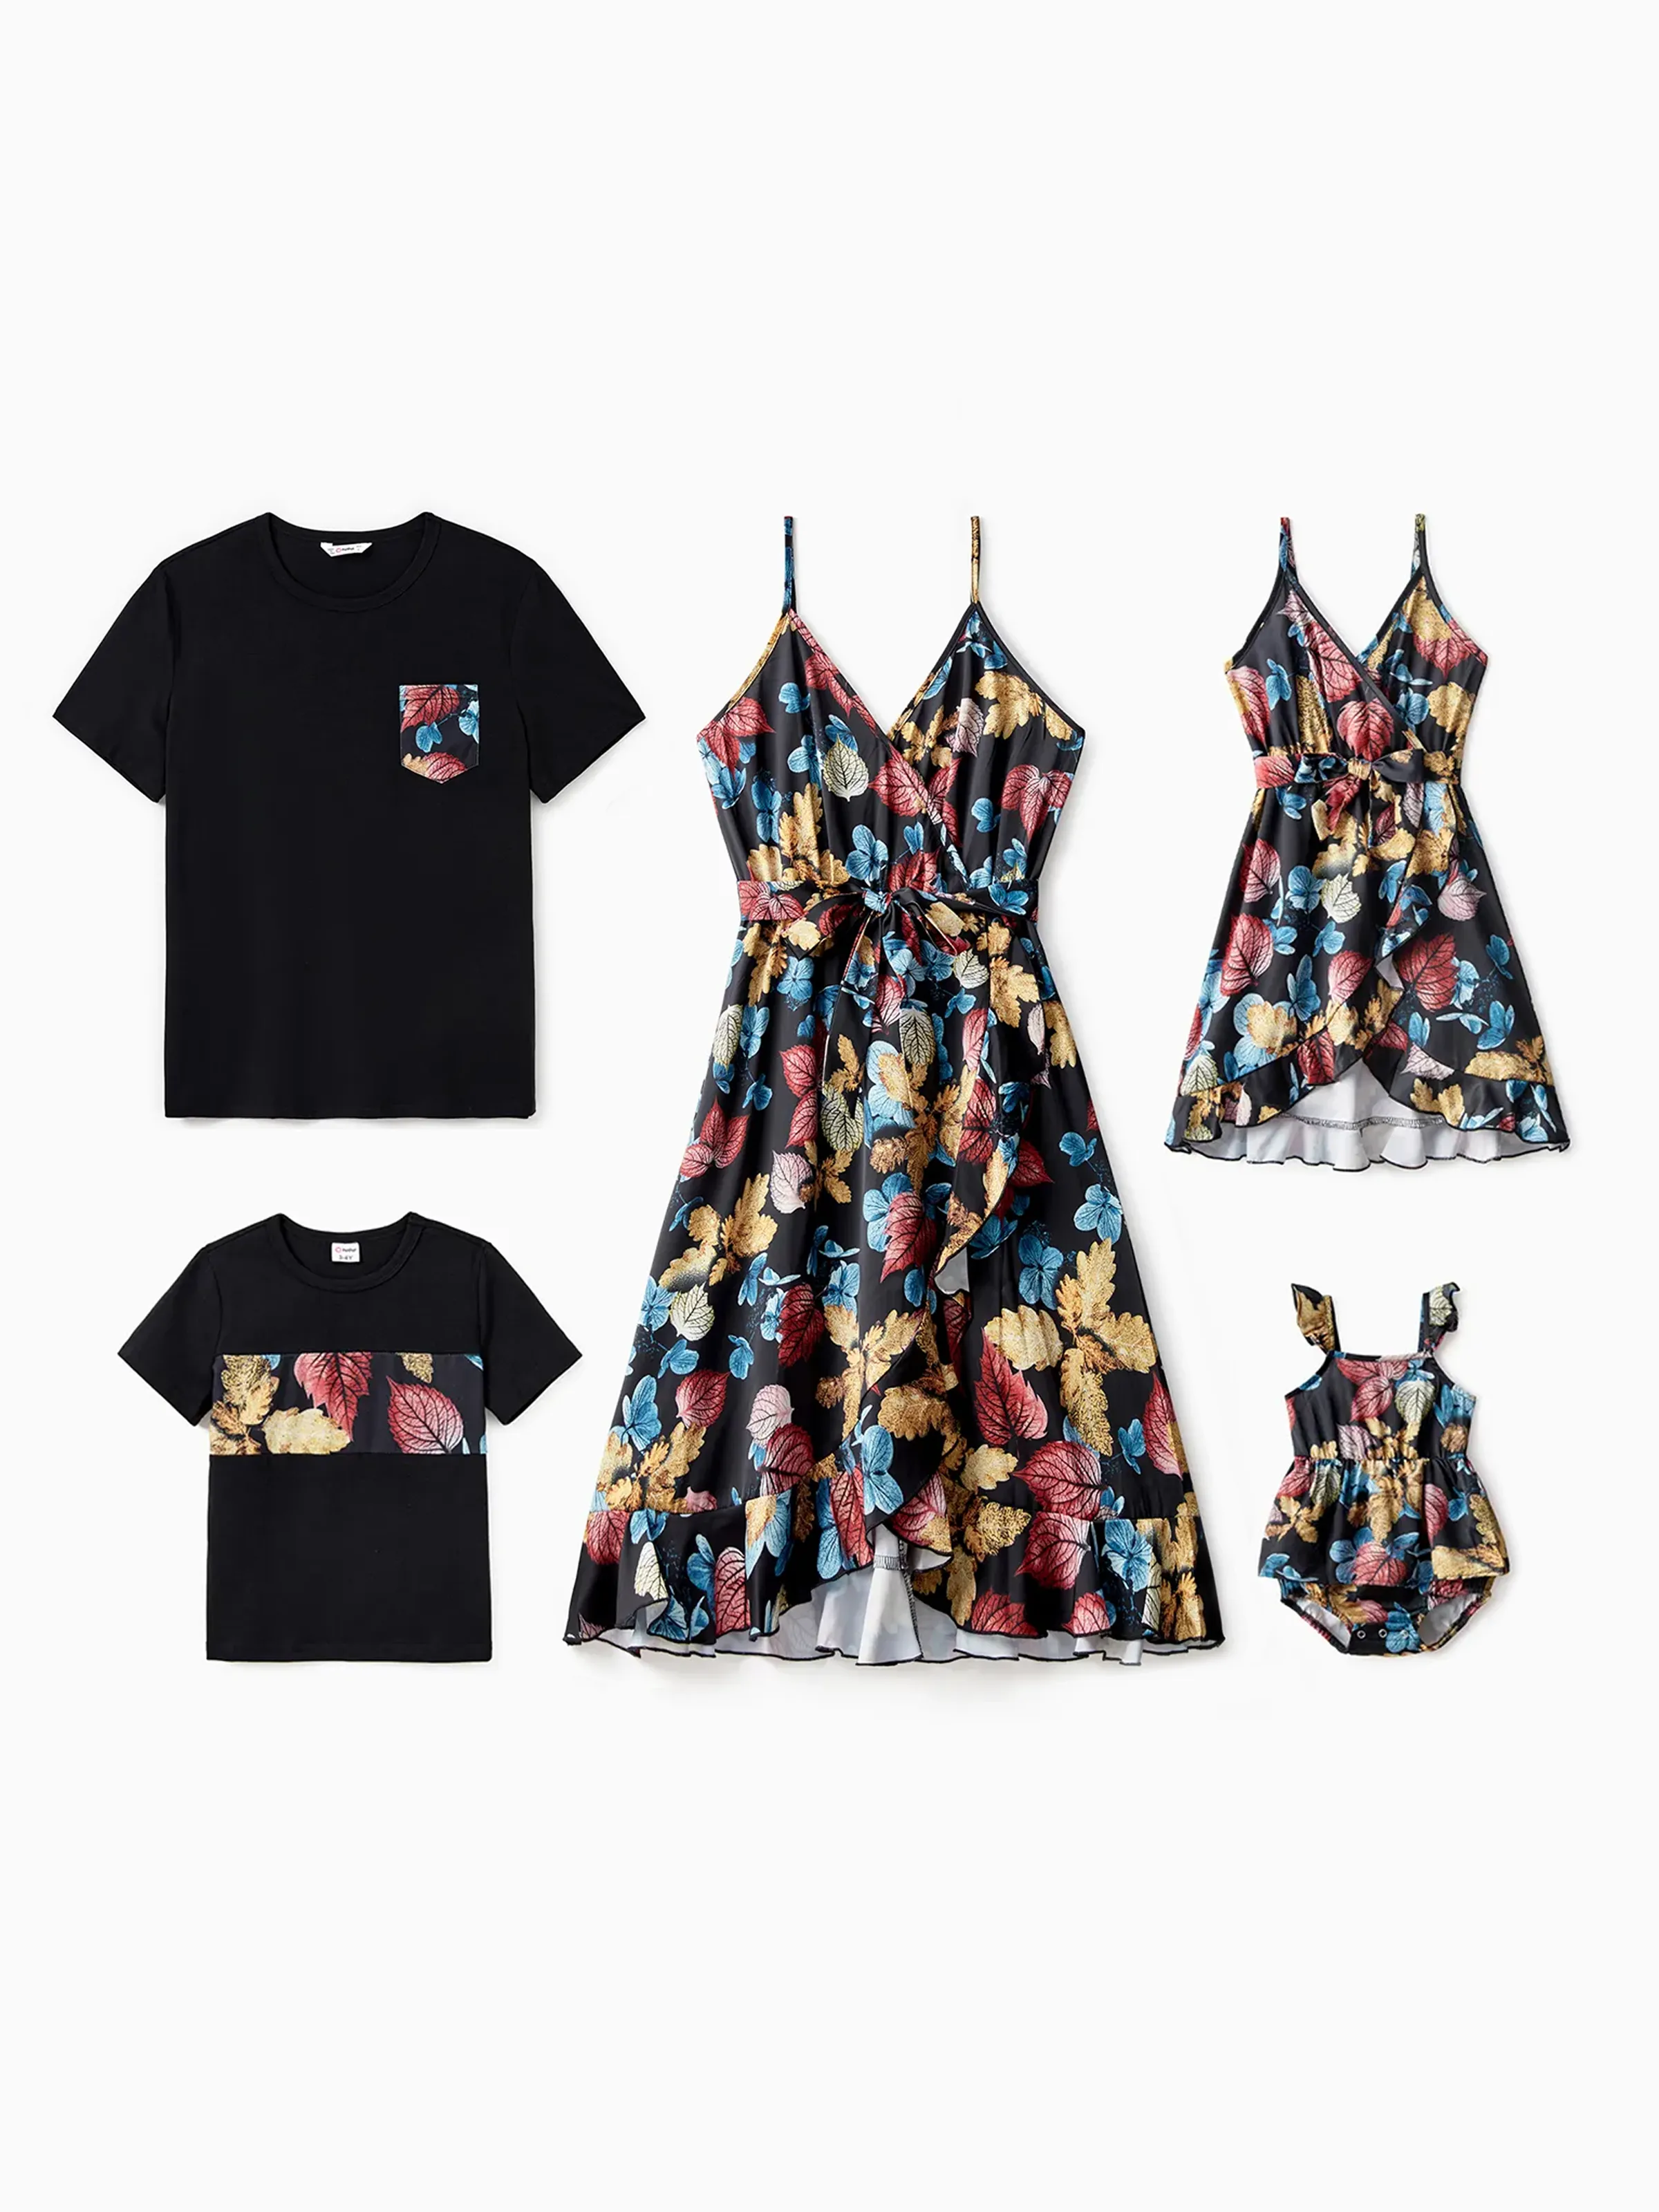 

Family Matching Sets Black Tee or Colorful Leaf Pattern Floral Wrap Bottom Ruffle Hem High-Low Dress with Hidden Snap